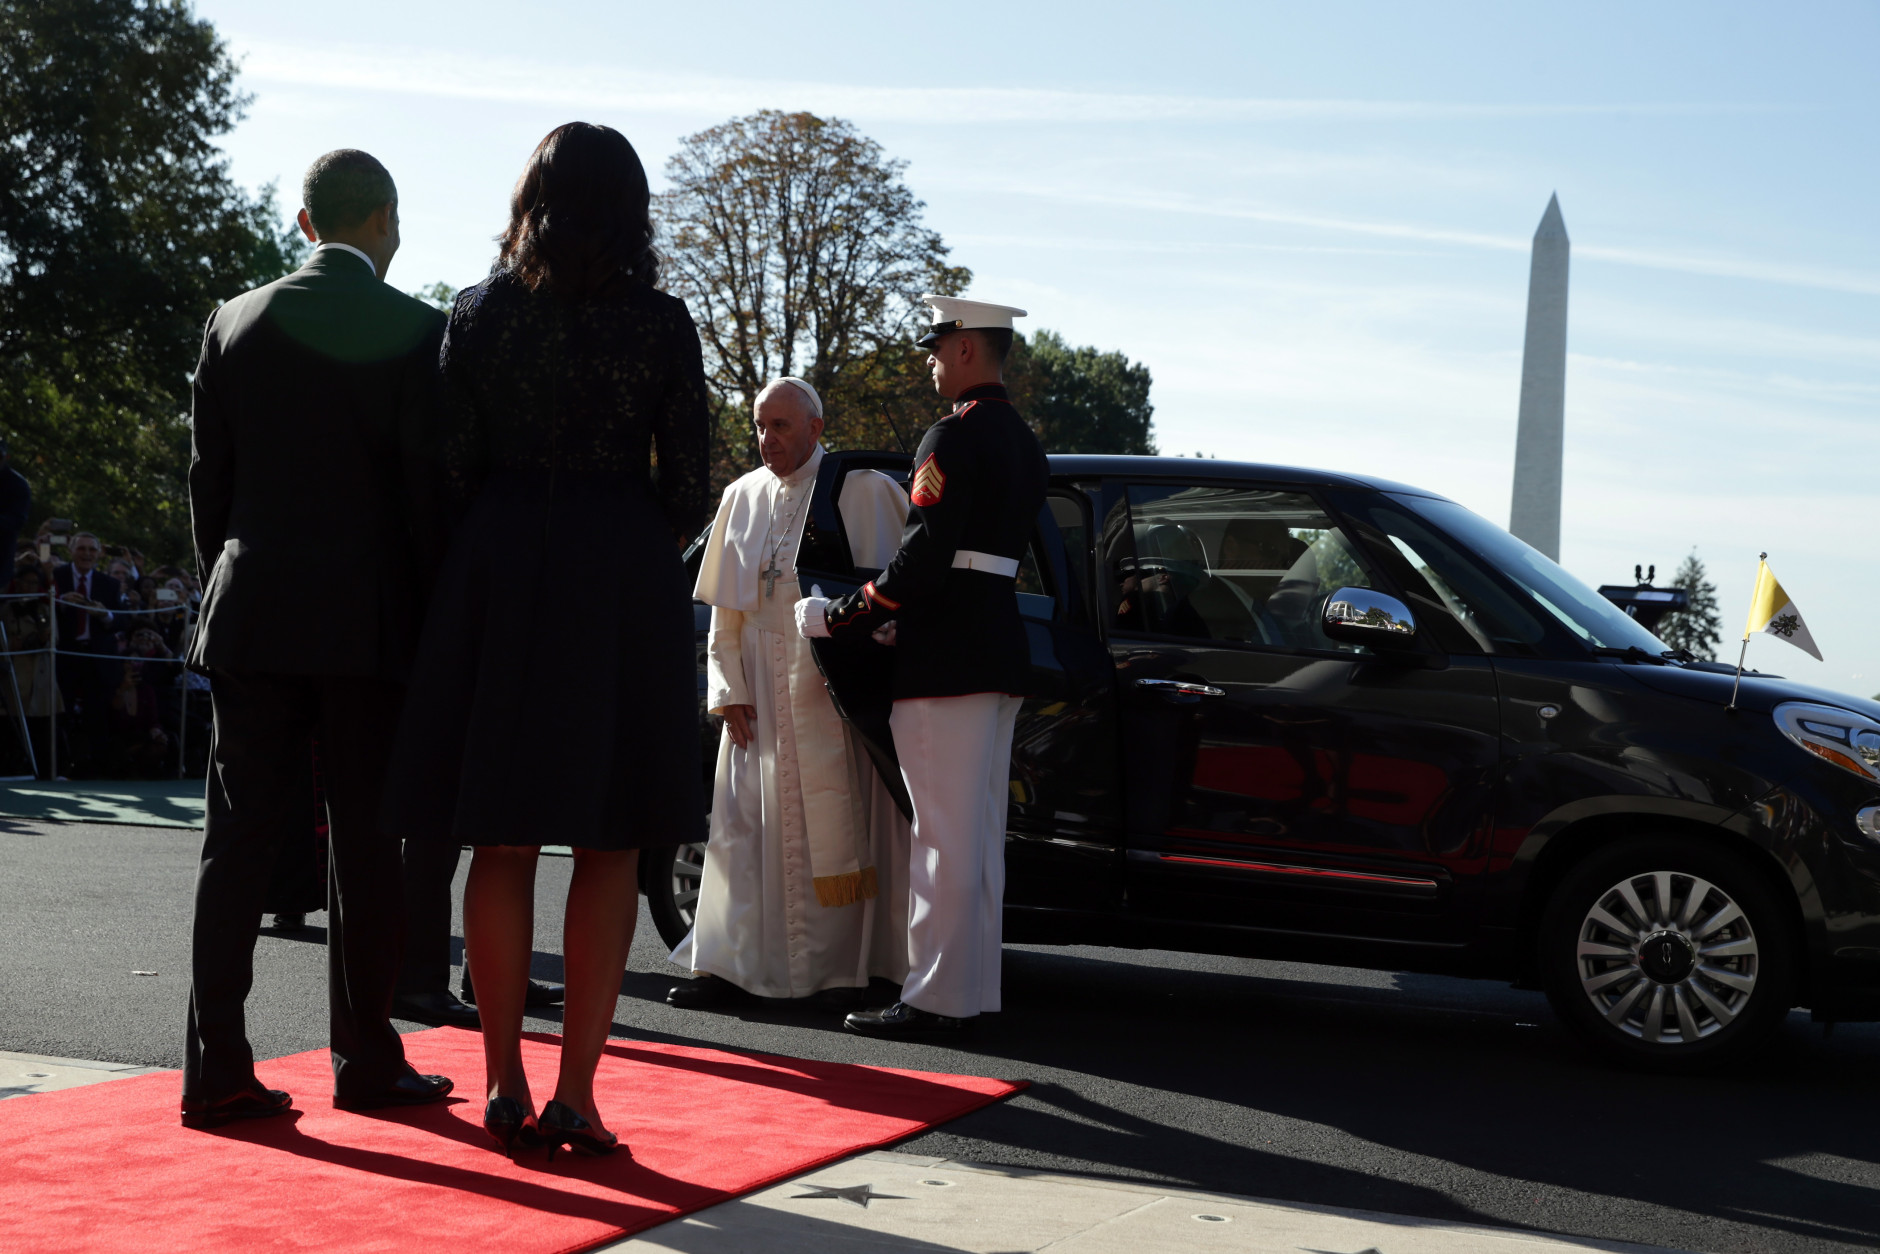 WASHINGTON, DC - SEPTEMBER 23:   Pope Francis exits his car to greet the U.S. President Barack Obama and first Lady Michelle Obama in an arrival ceremony at the White House on September 23, 2015 in Washington, DC. The Pope begins his first trip to the United States at the White House followed by a visit to St. Matthew's Cathedral, and will then hold a Mass on the grounds of the Basilica of the National Shrine of the Immaculate Conception.  (Photo by Alex Wong/Getty Images)